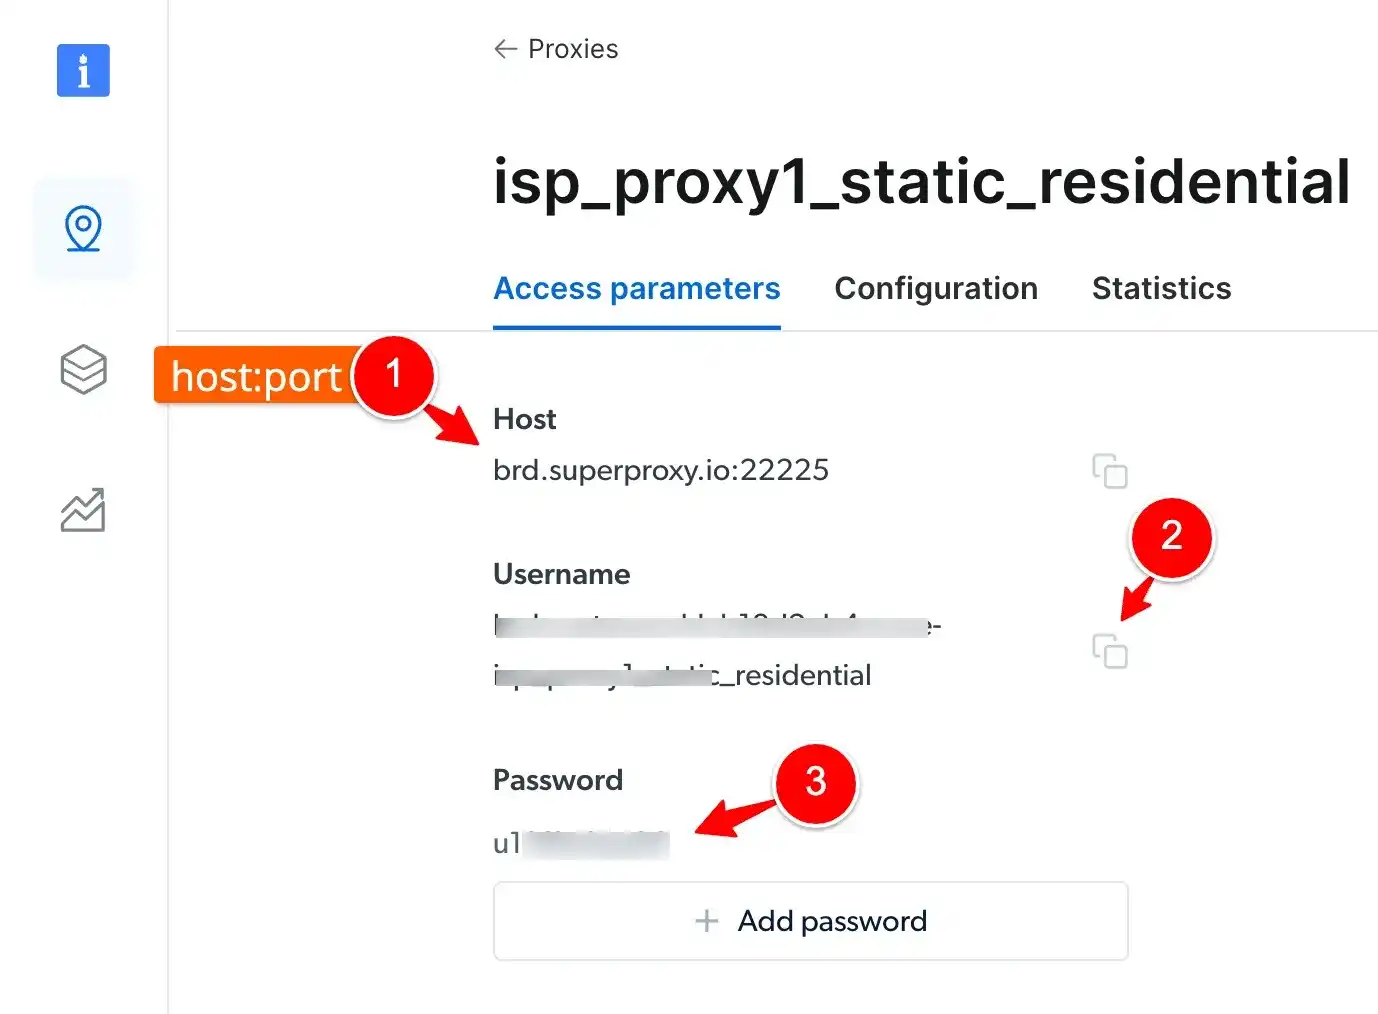 Access Credentials for ISP proxy